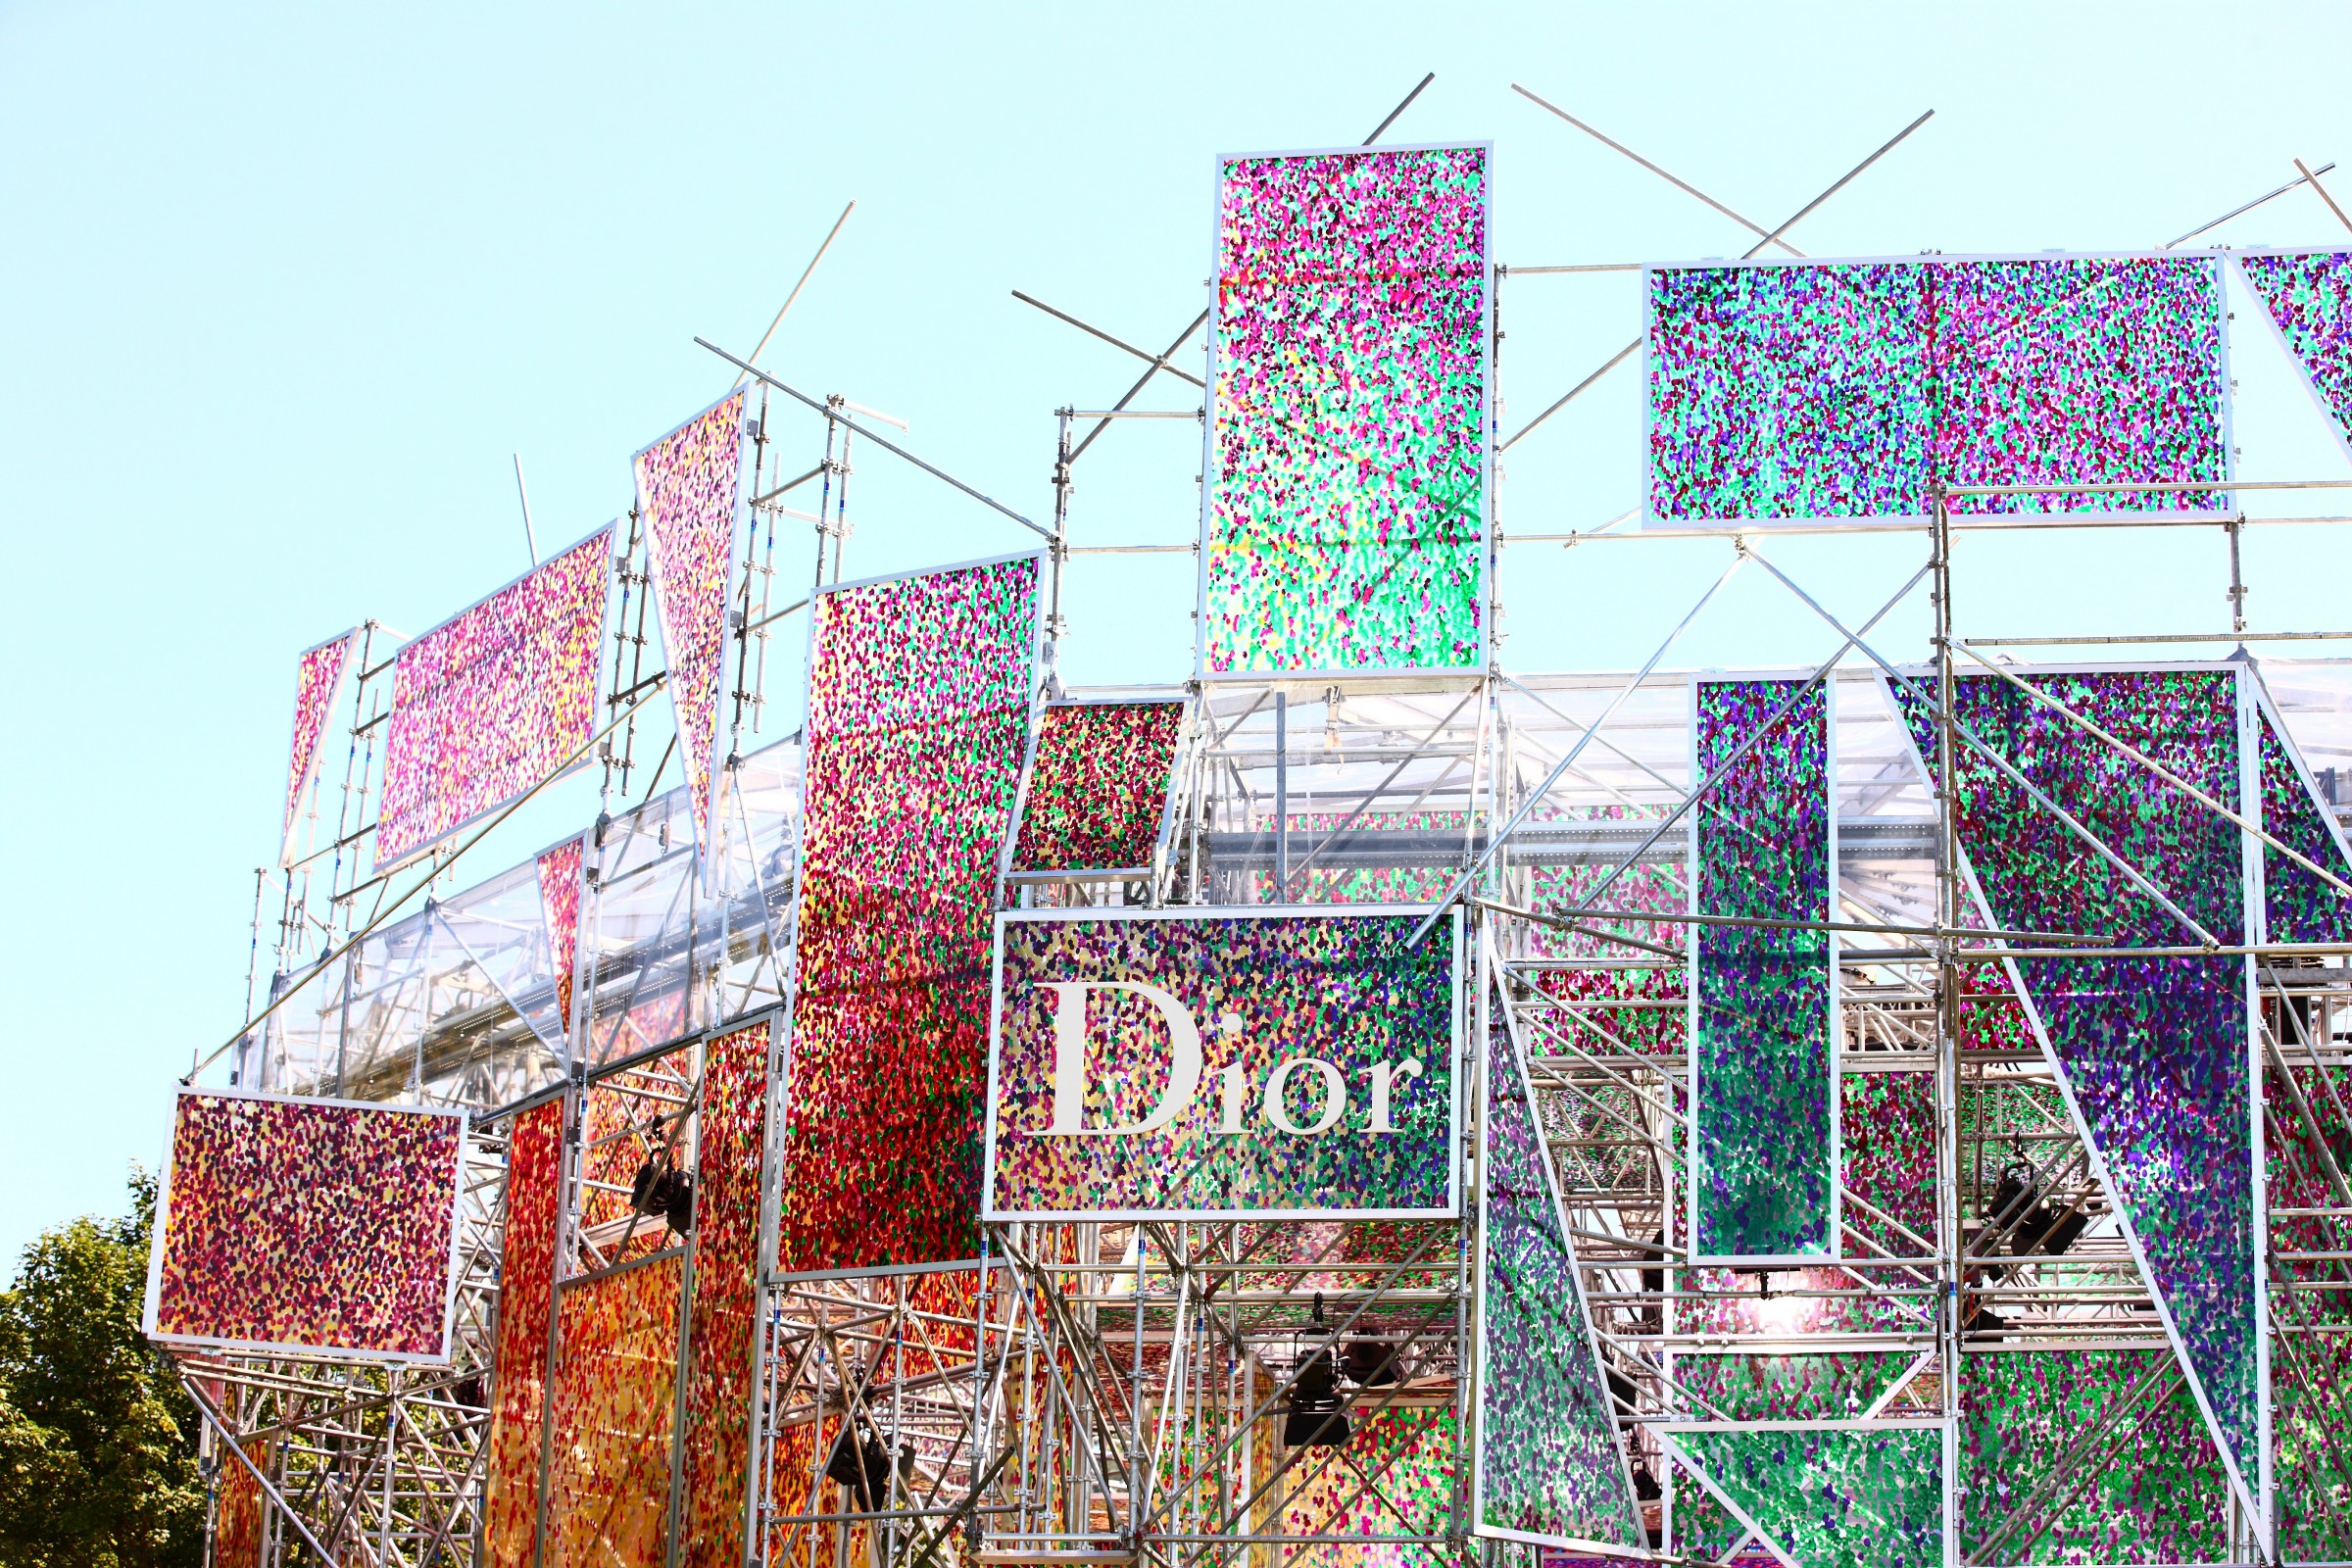 Through Dior's Looking Glass